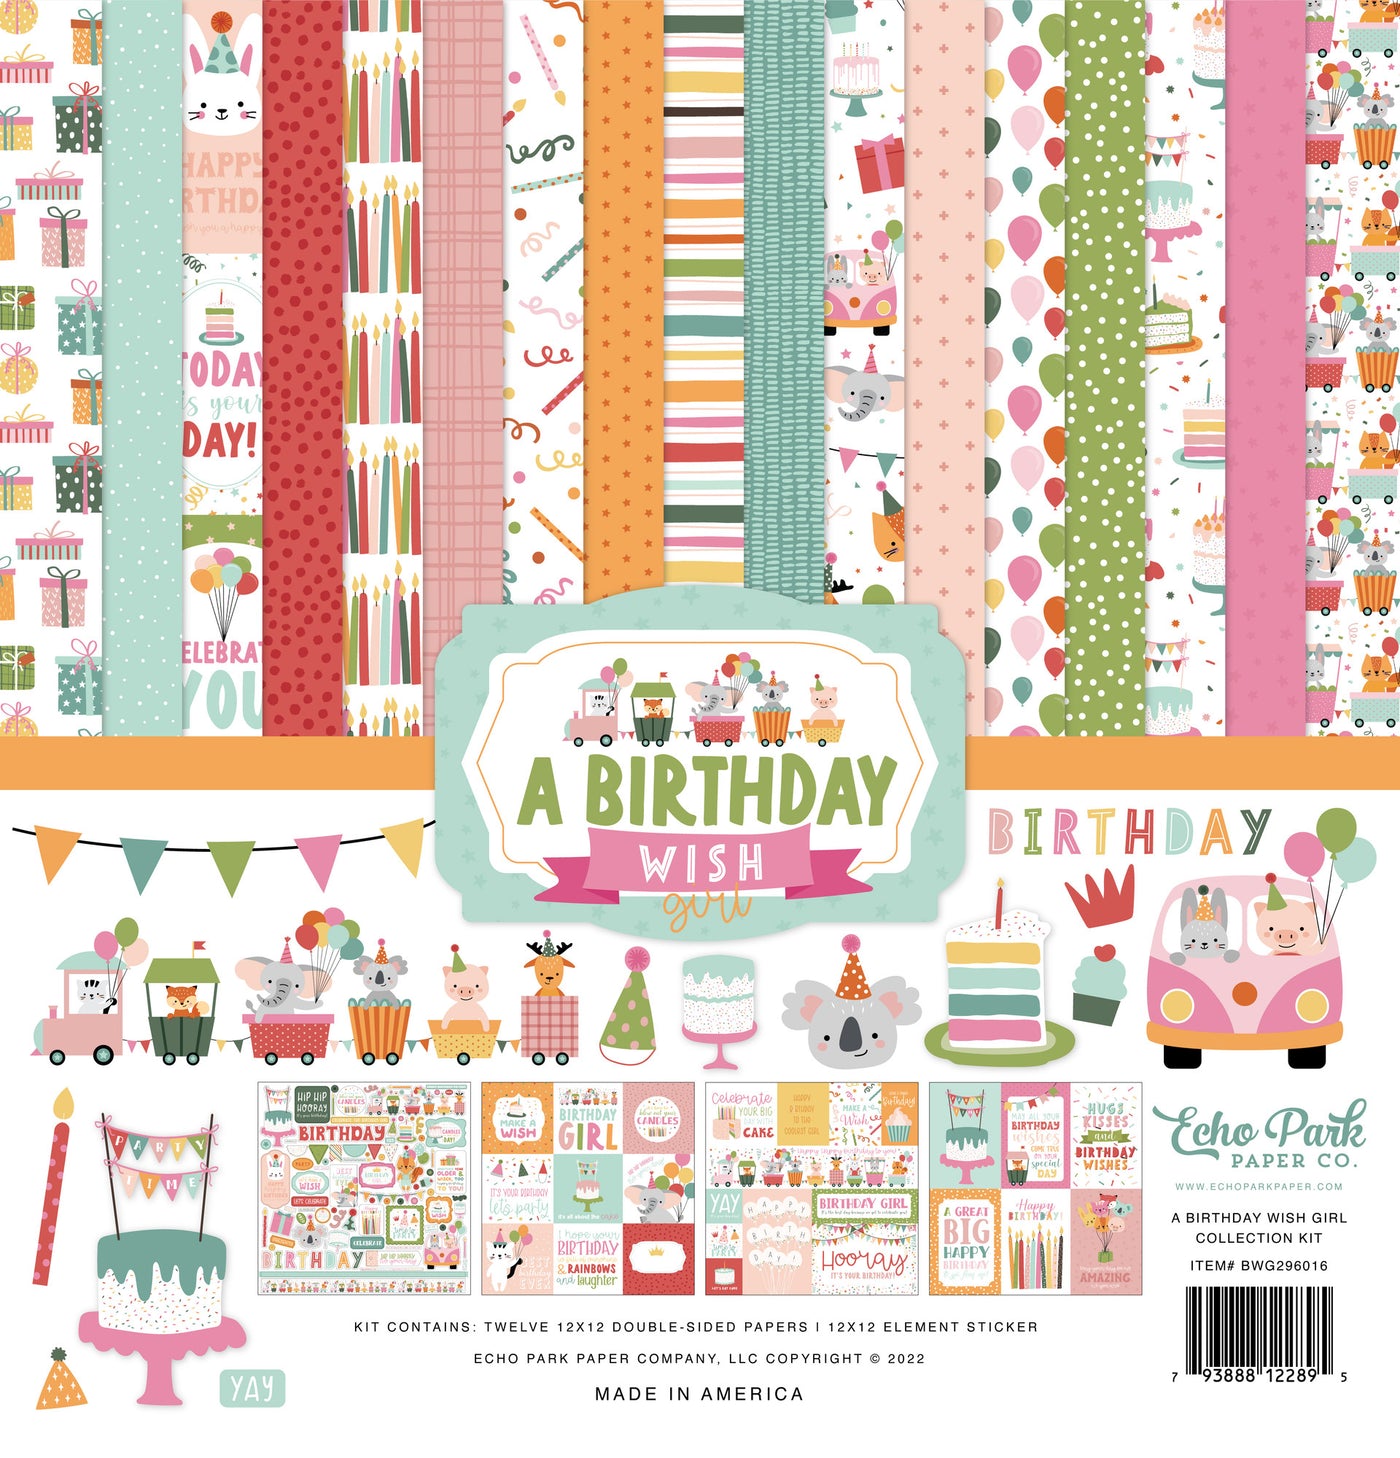 Twelve double-sided papers with party colors and themes focused on a girl's birthday. 12x12 inch textured cardstock; includes Element Sticker Sheet.